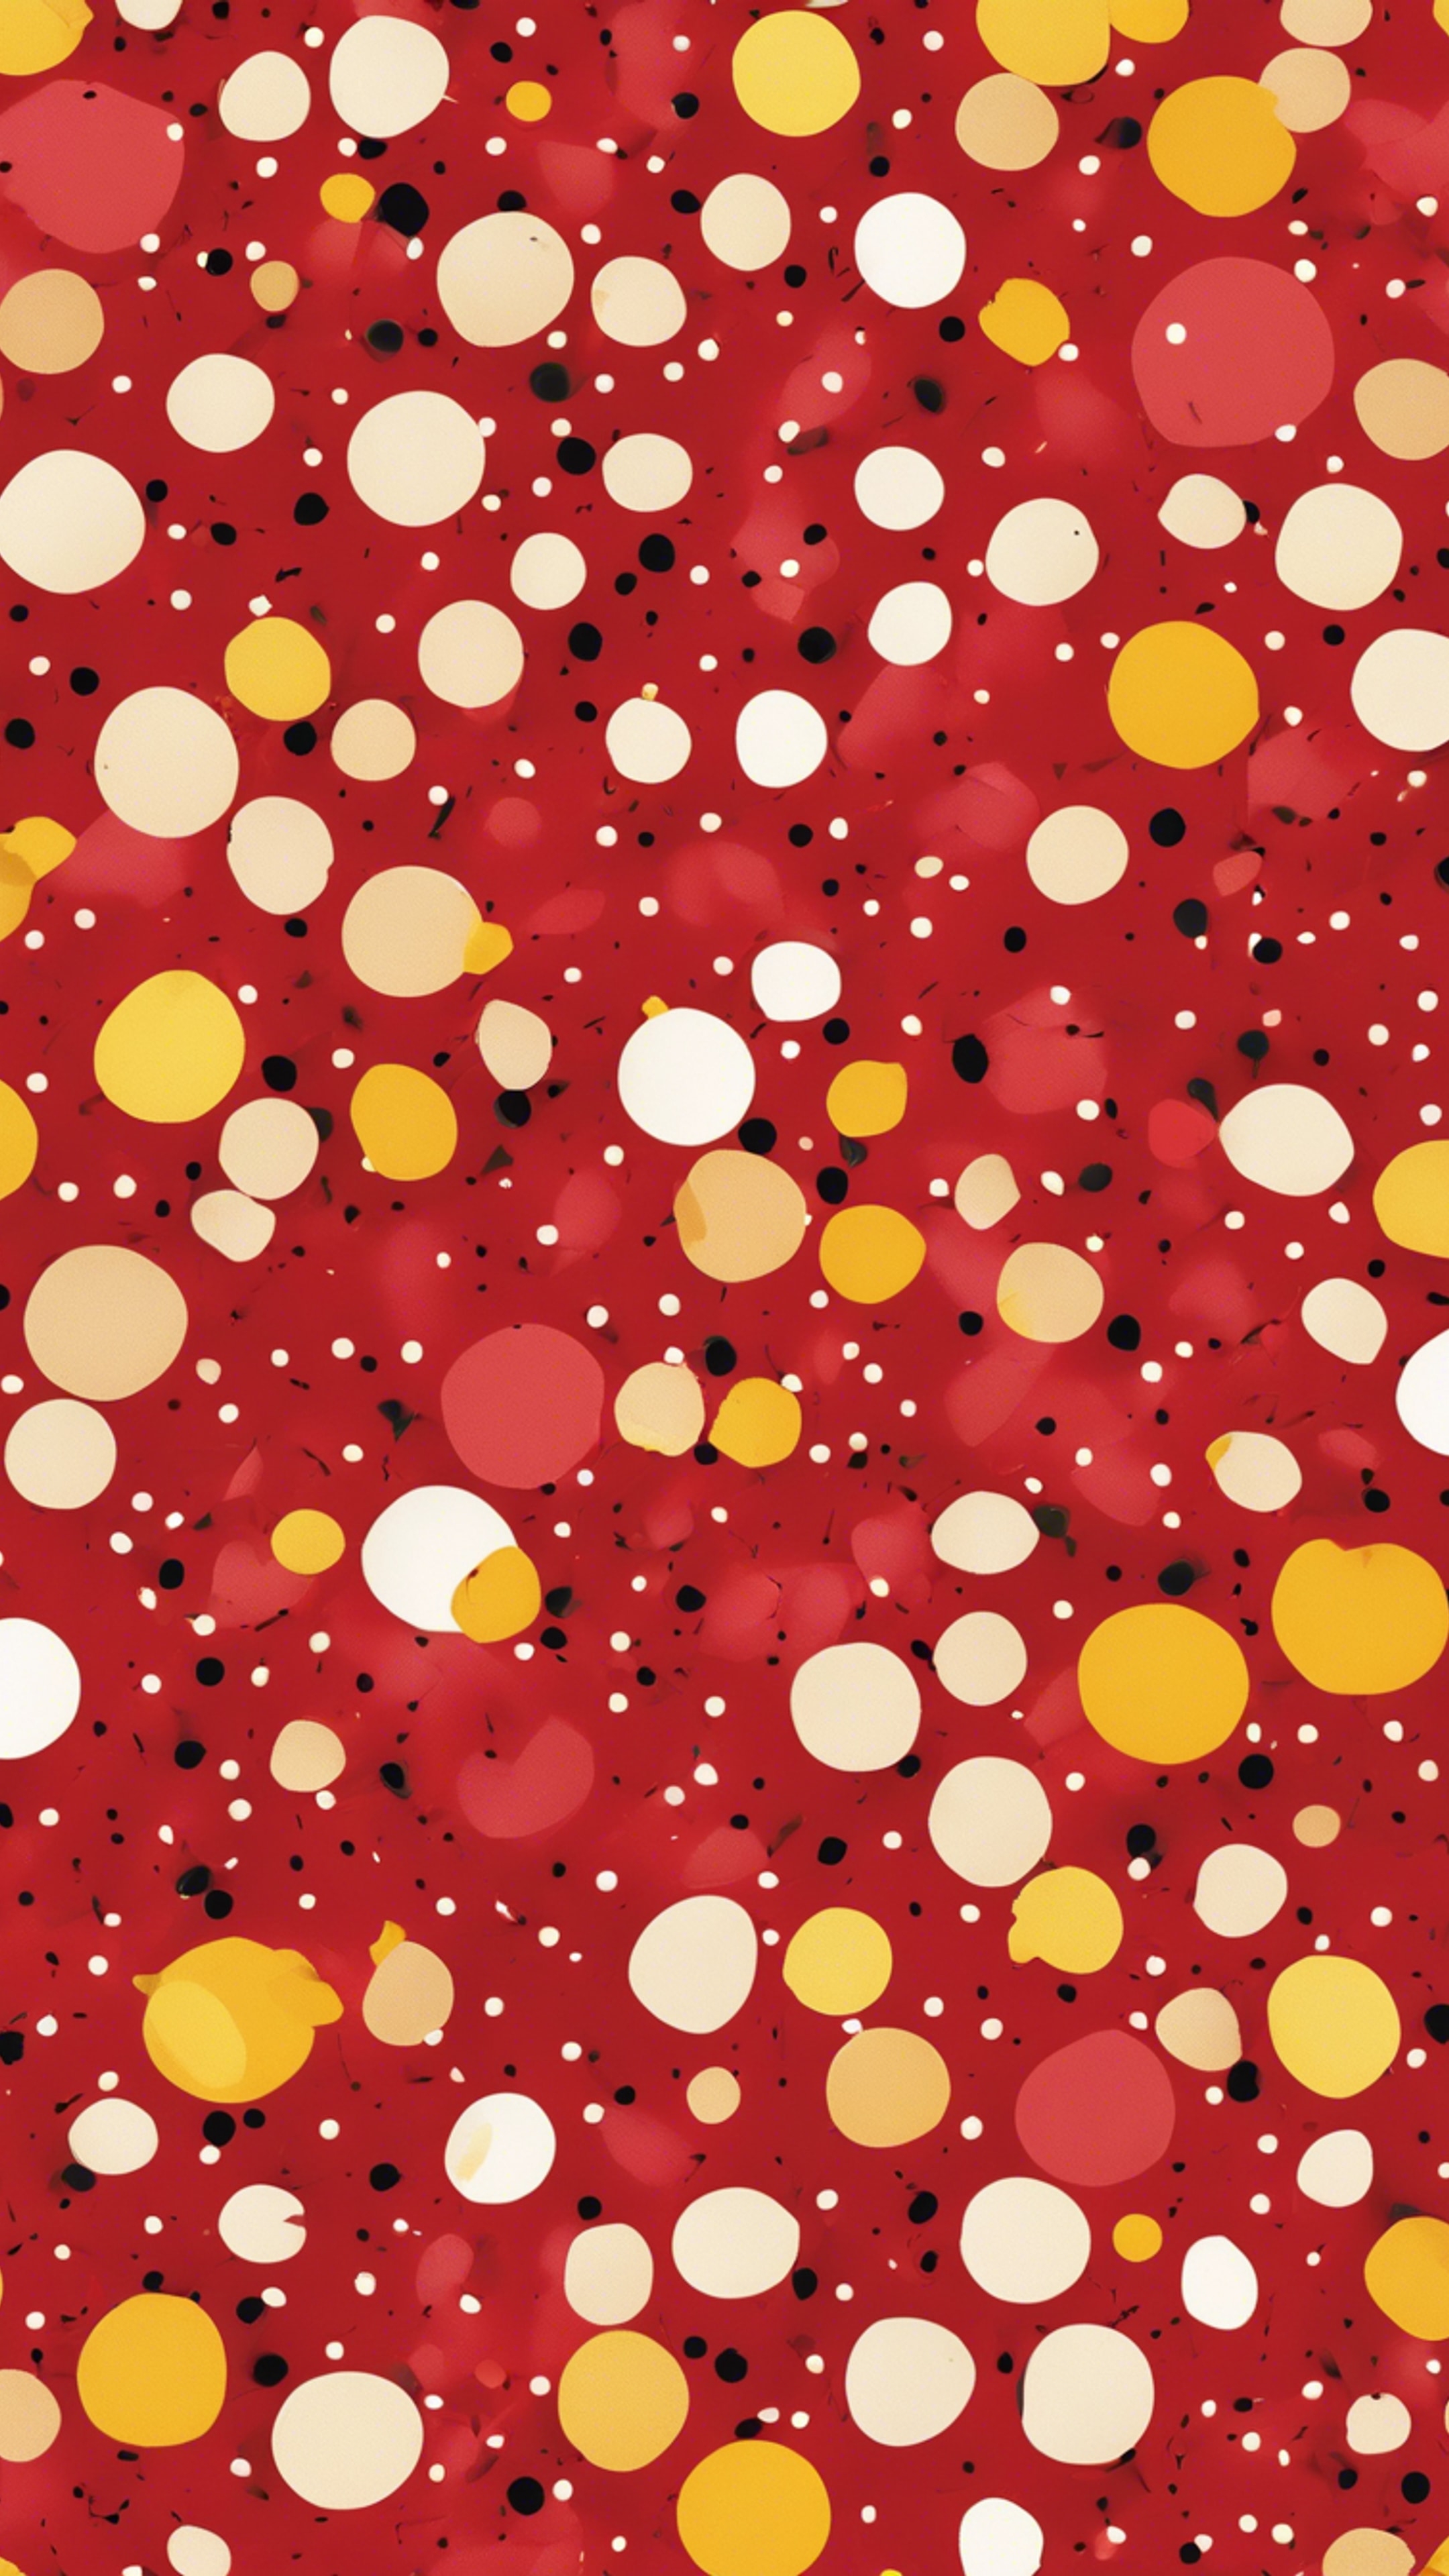 A seamless pattern of vibrant red and vivid yellow, polka dots scattered randomly. 牆紙[206bafc01adc43569588]